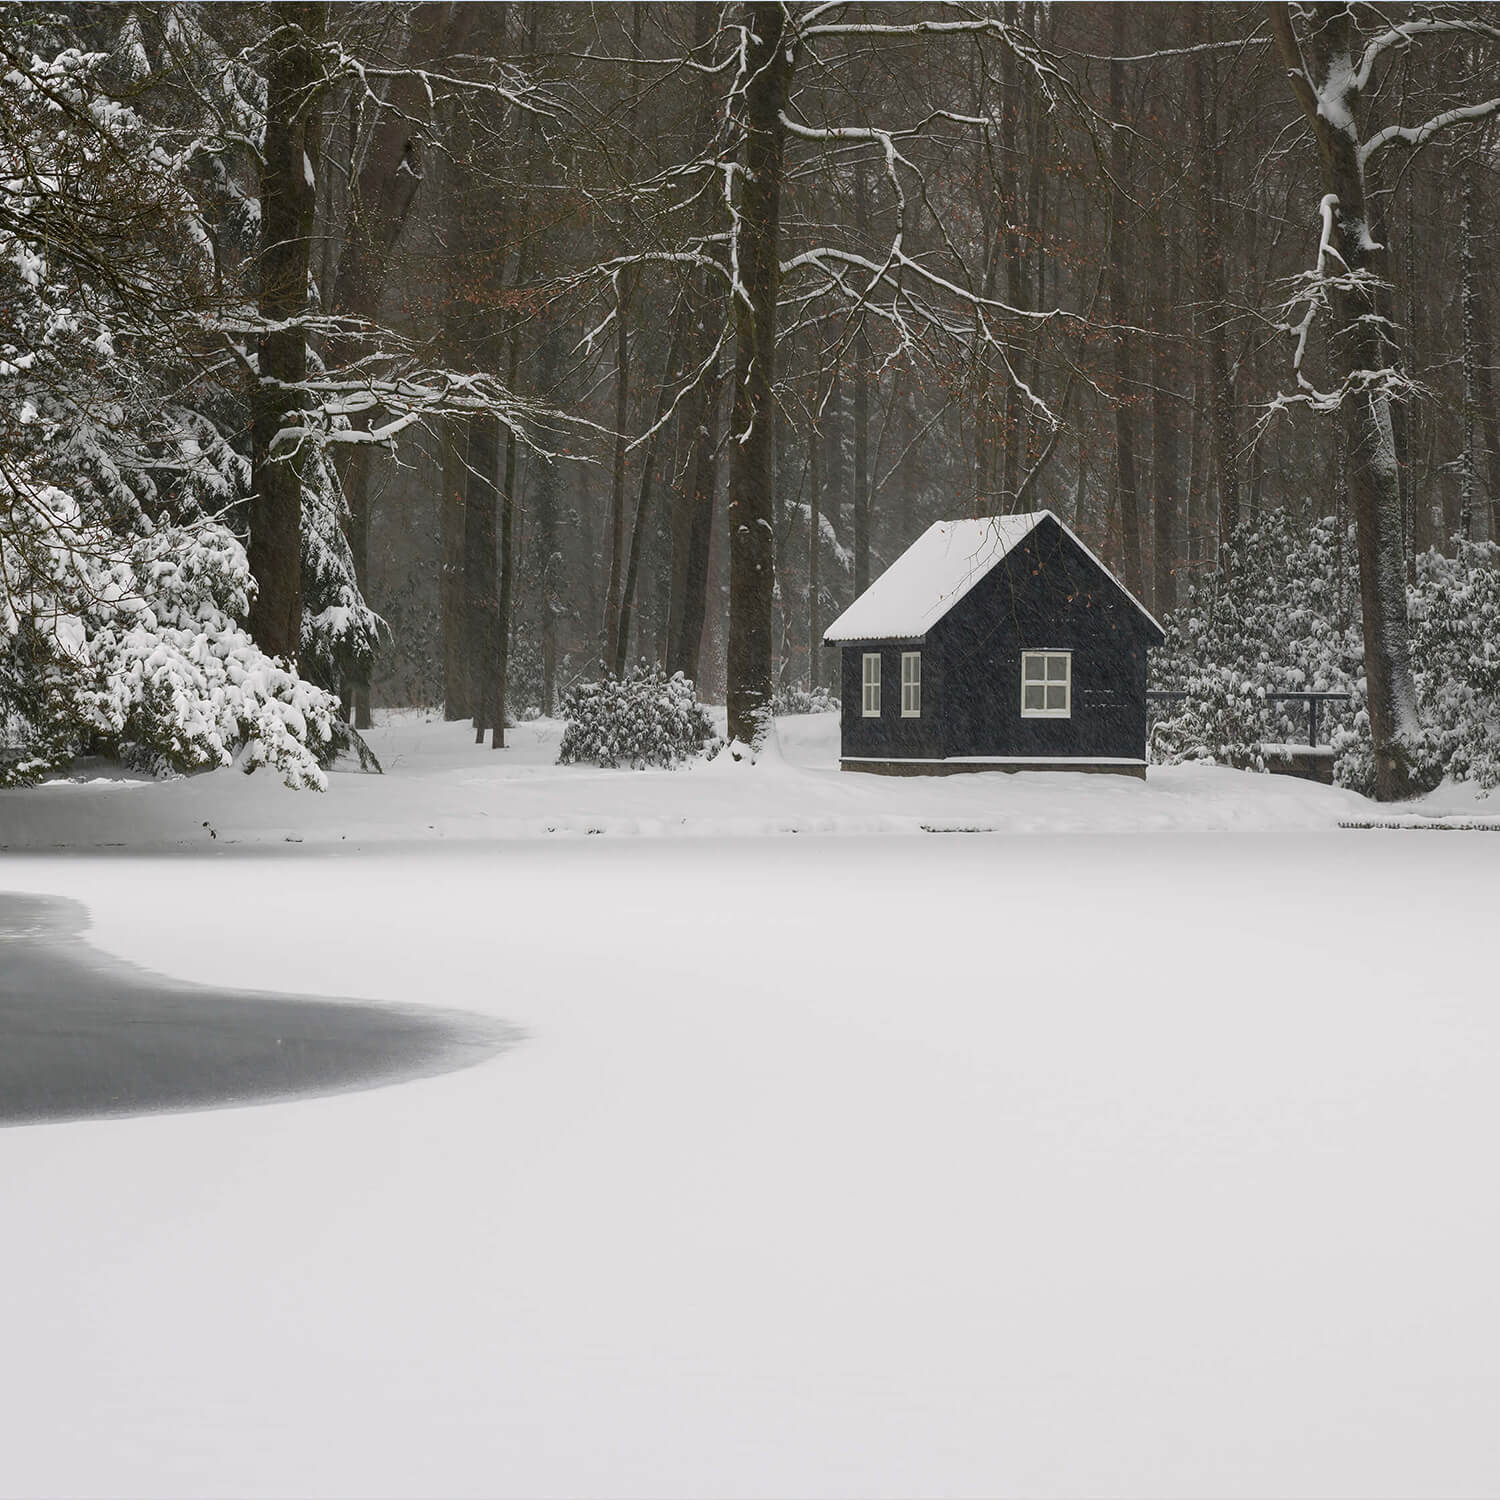 Cottage in the snow